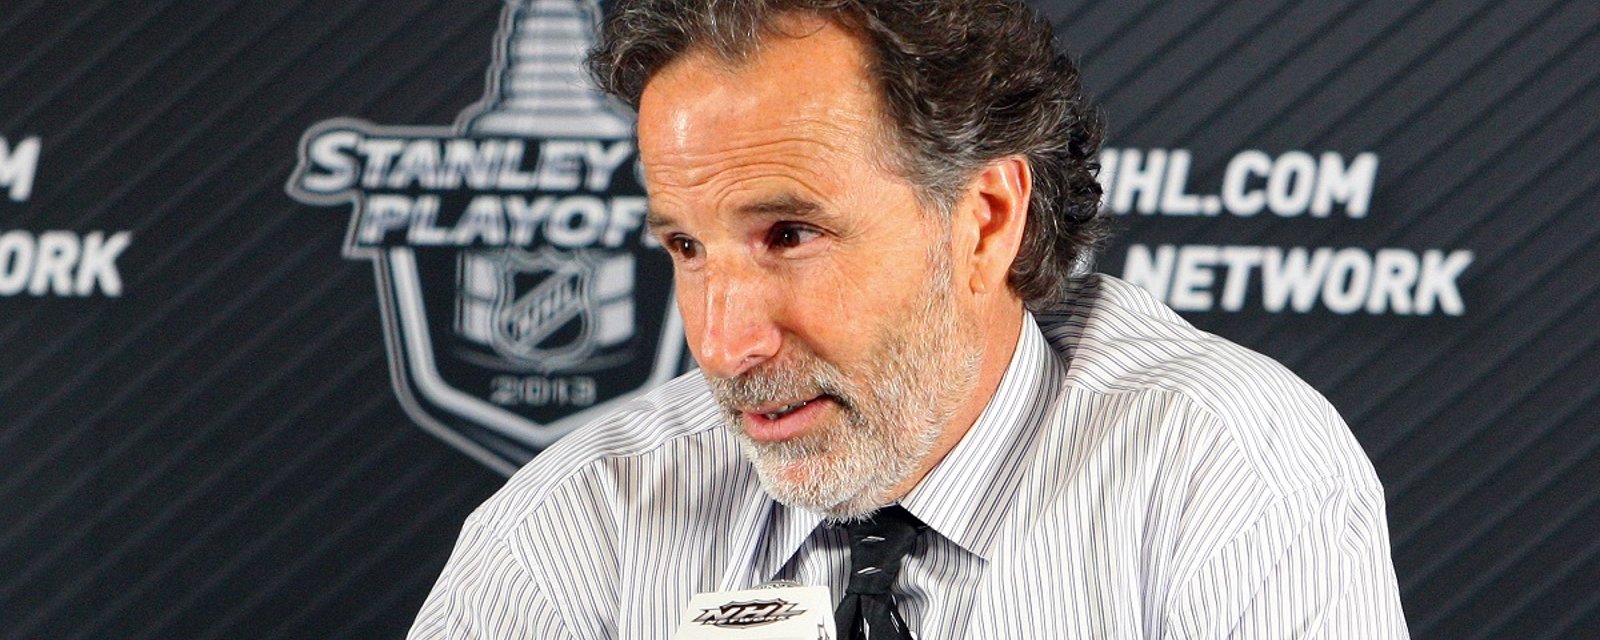 John Tortorella refuses to back down from his anthem comments.